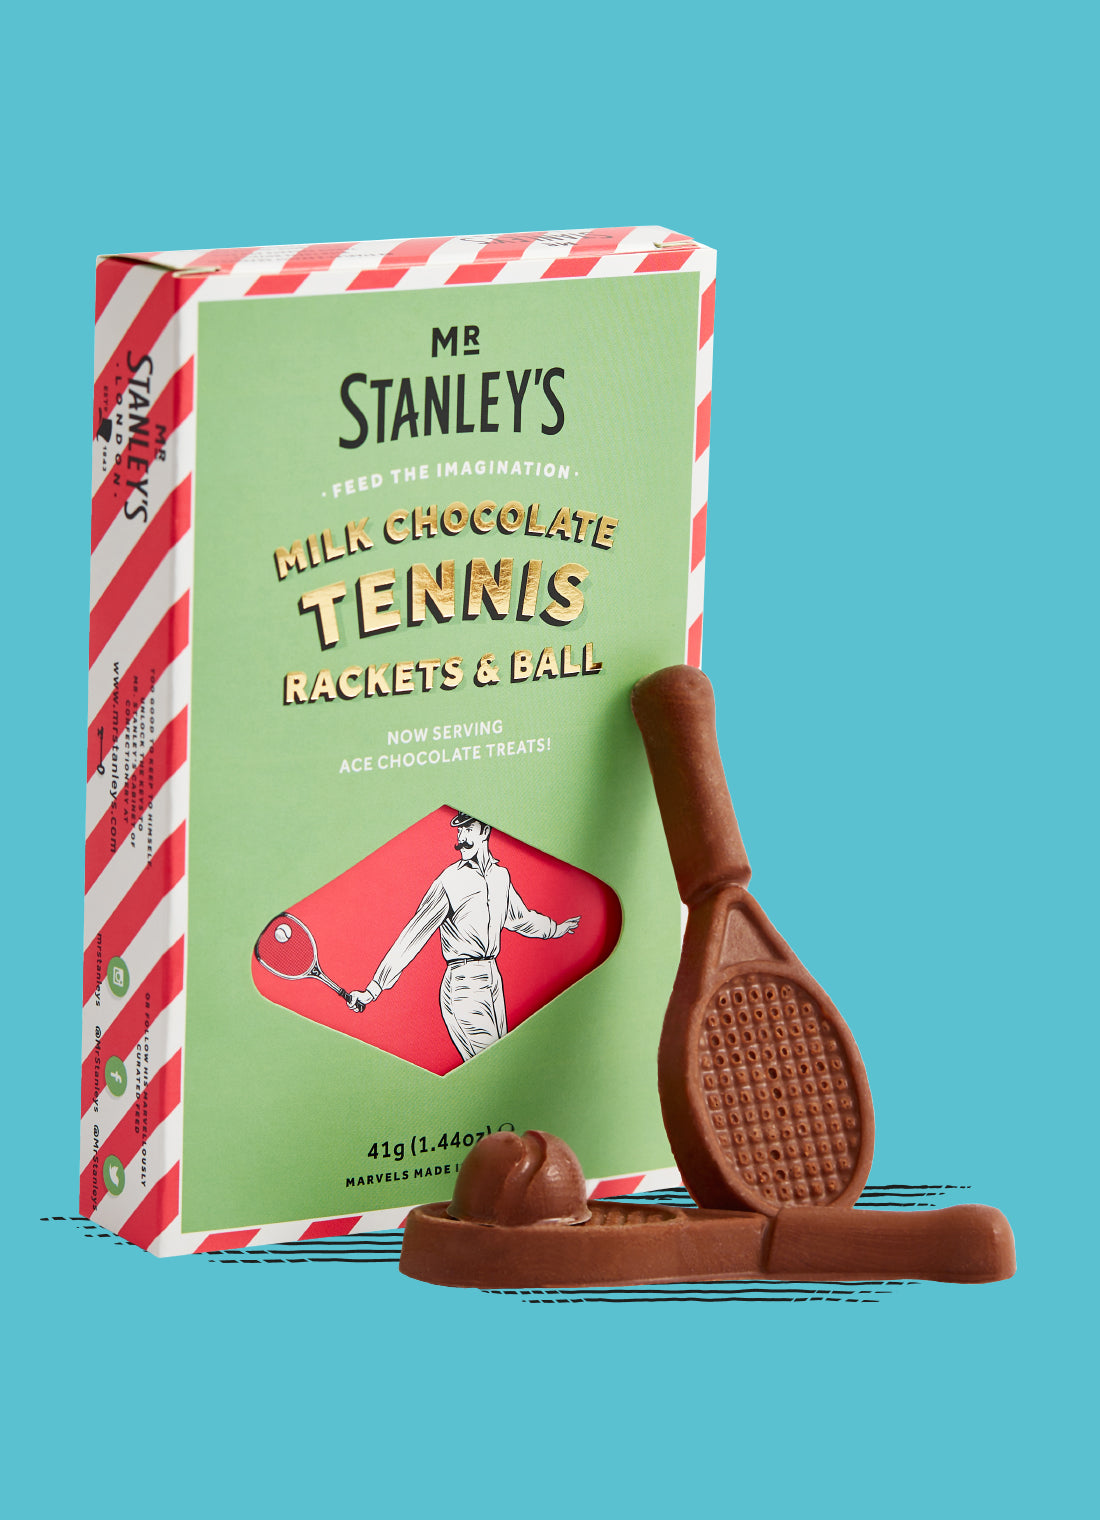 Swinging into Wimbledon with Mr. Stanley's Milk Chocolate Tennis Rackets and Ball